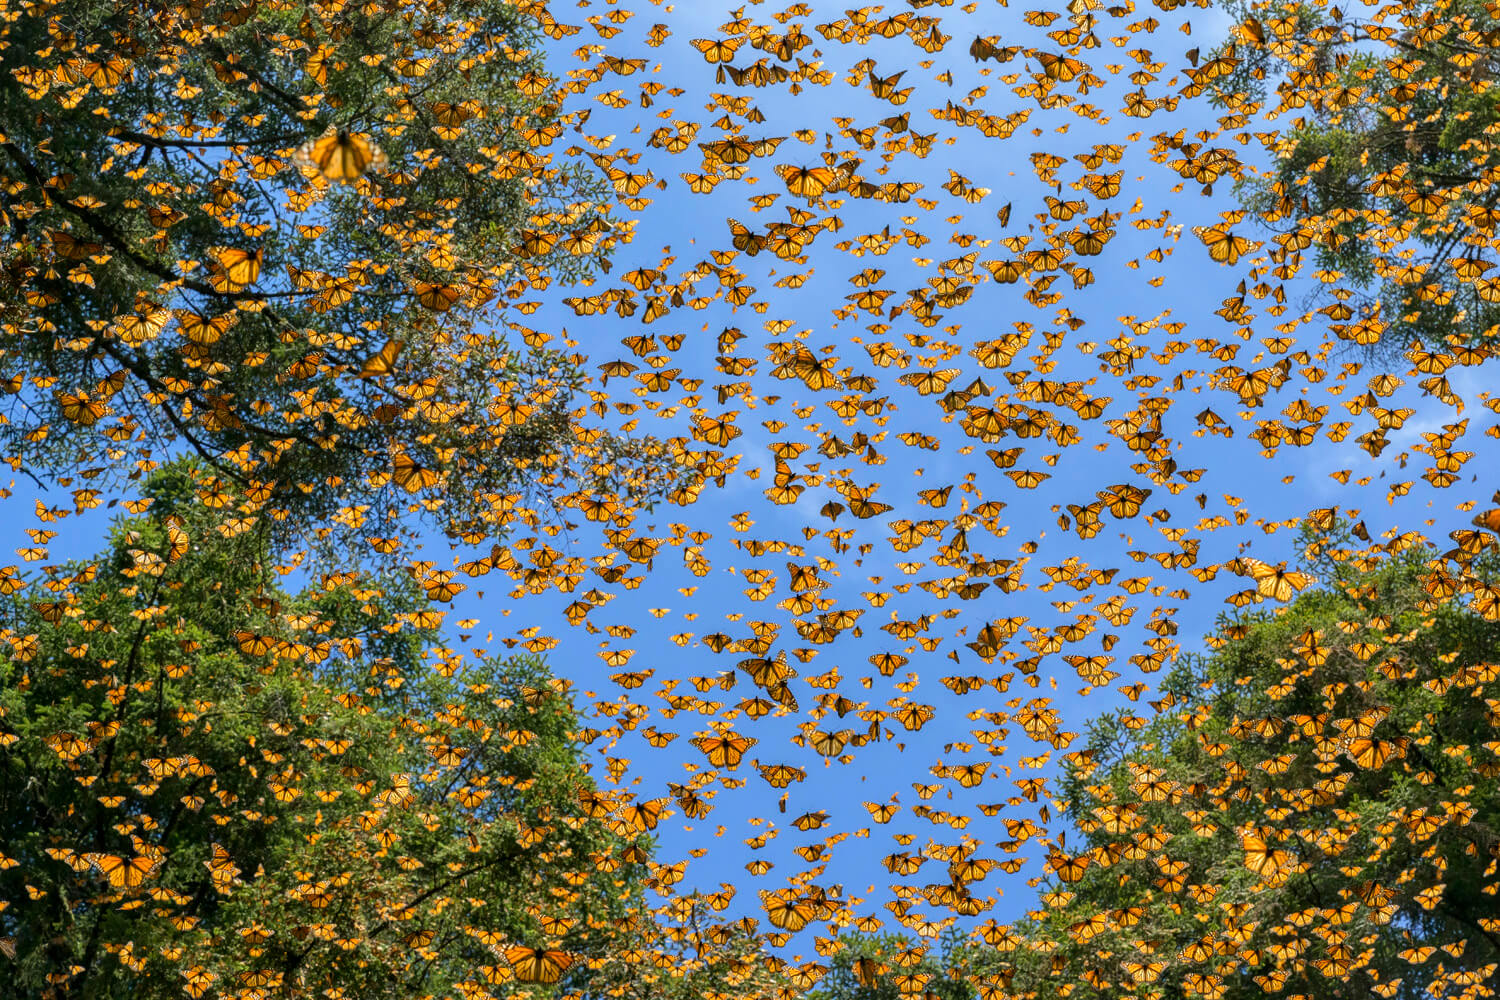 A swarm of butterflies fills the sky amidst treetops, creating a breathtaking spectacle of nature's migration.